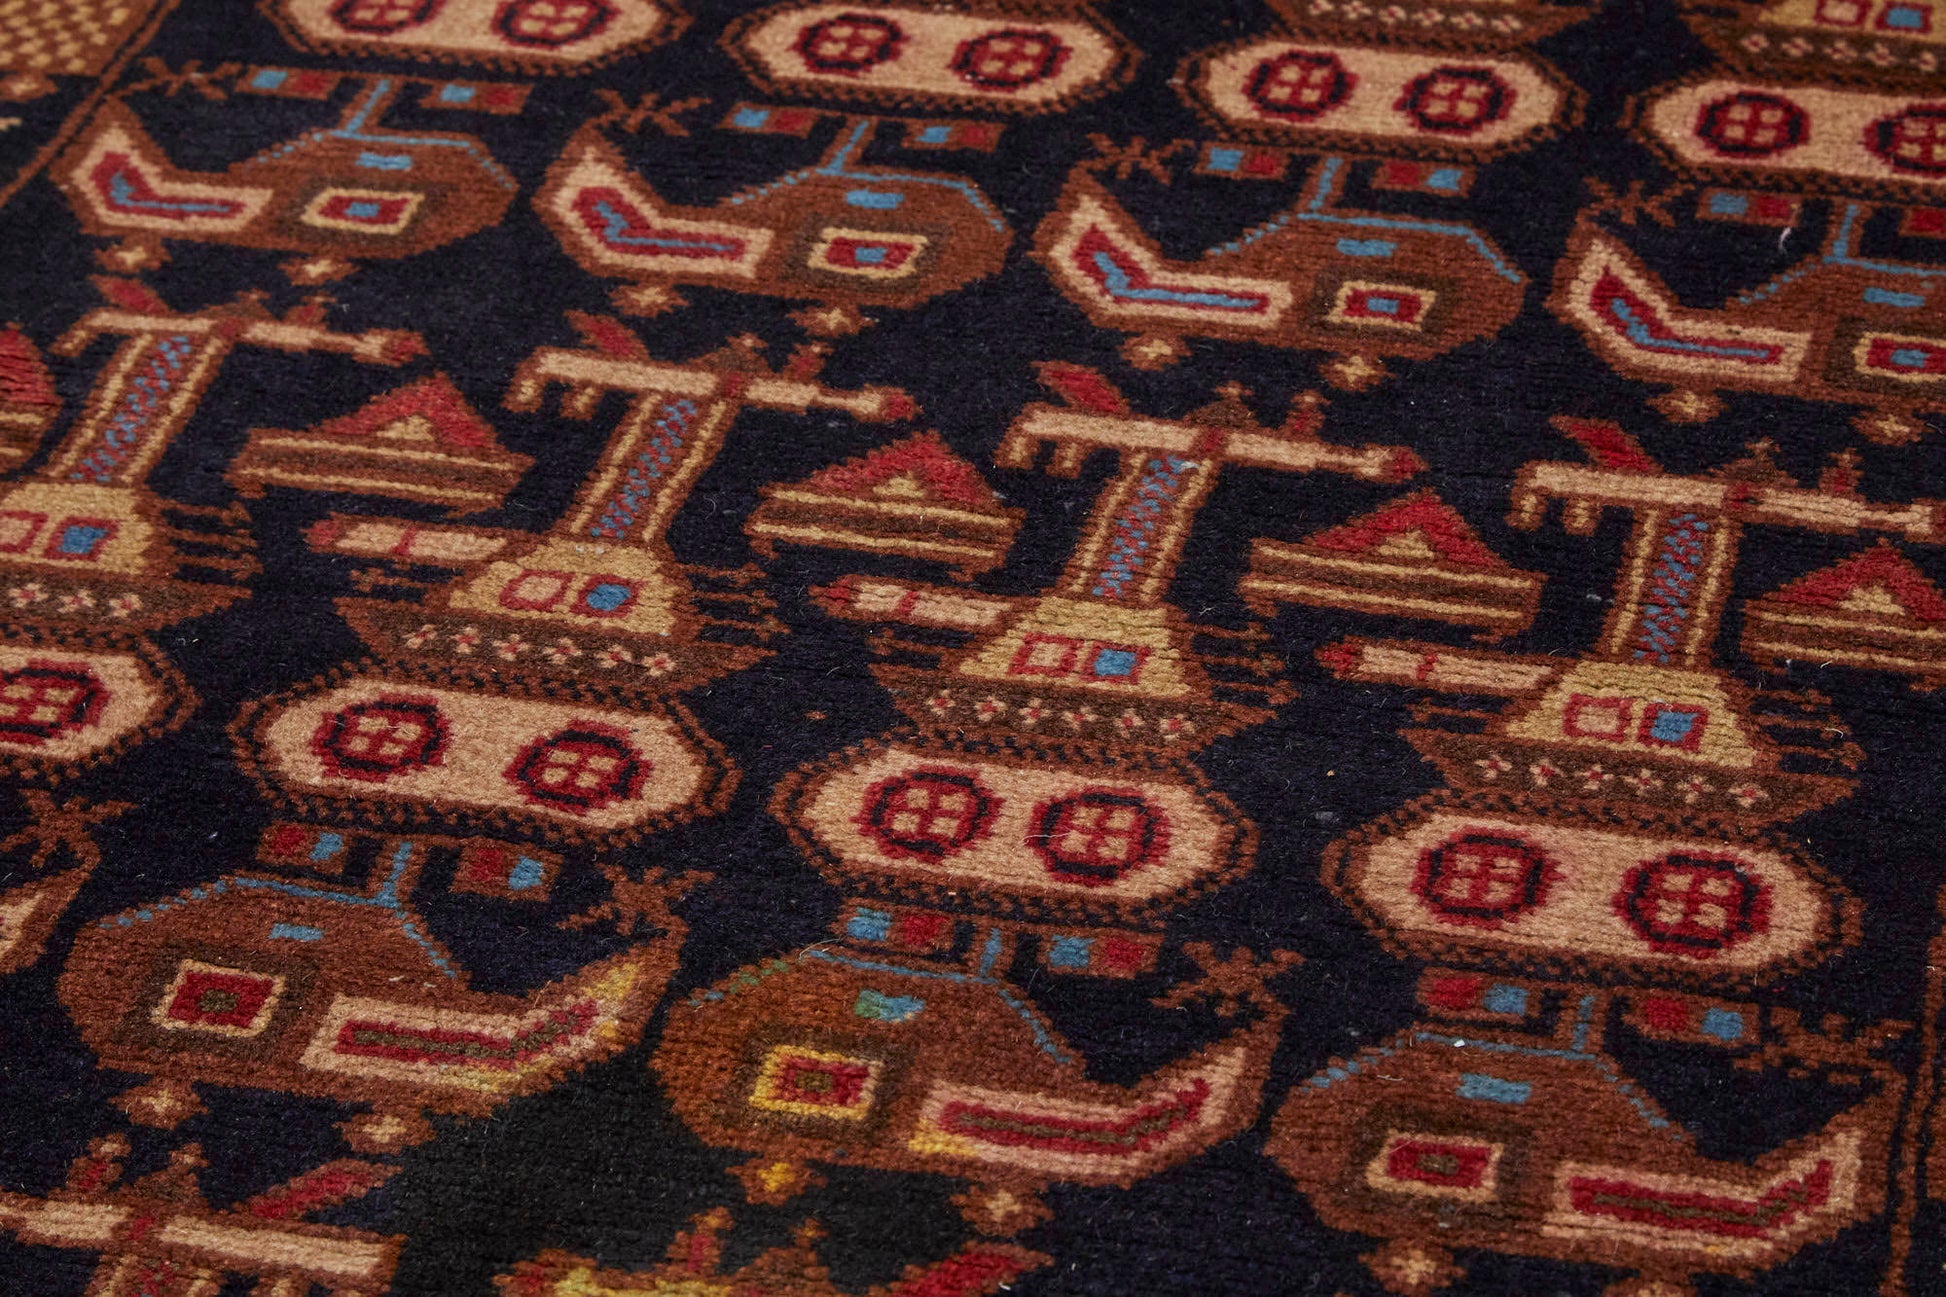 Hand woven Afghan War rug runner with dark base and tan, red and blue tanks and helicopters woven throughout - Available from King Kennedy Rugs Los Angeles